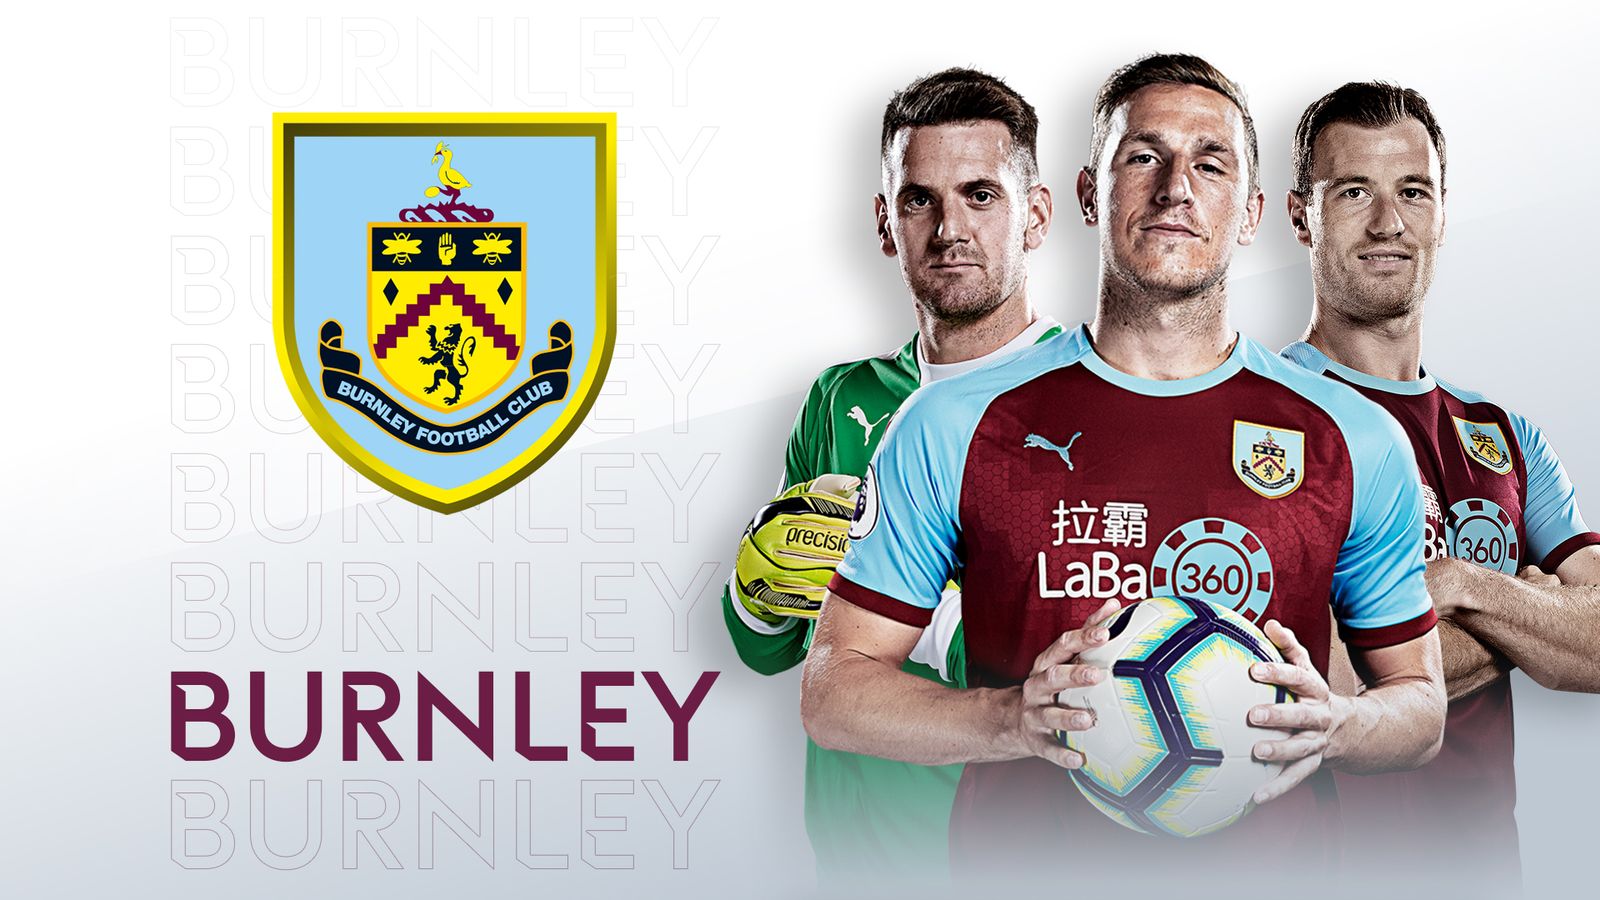 Burnley FC A History of Grit and Resilience